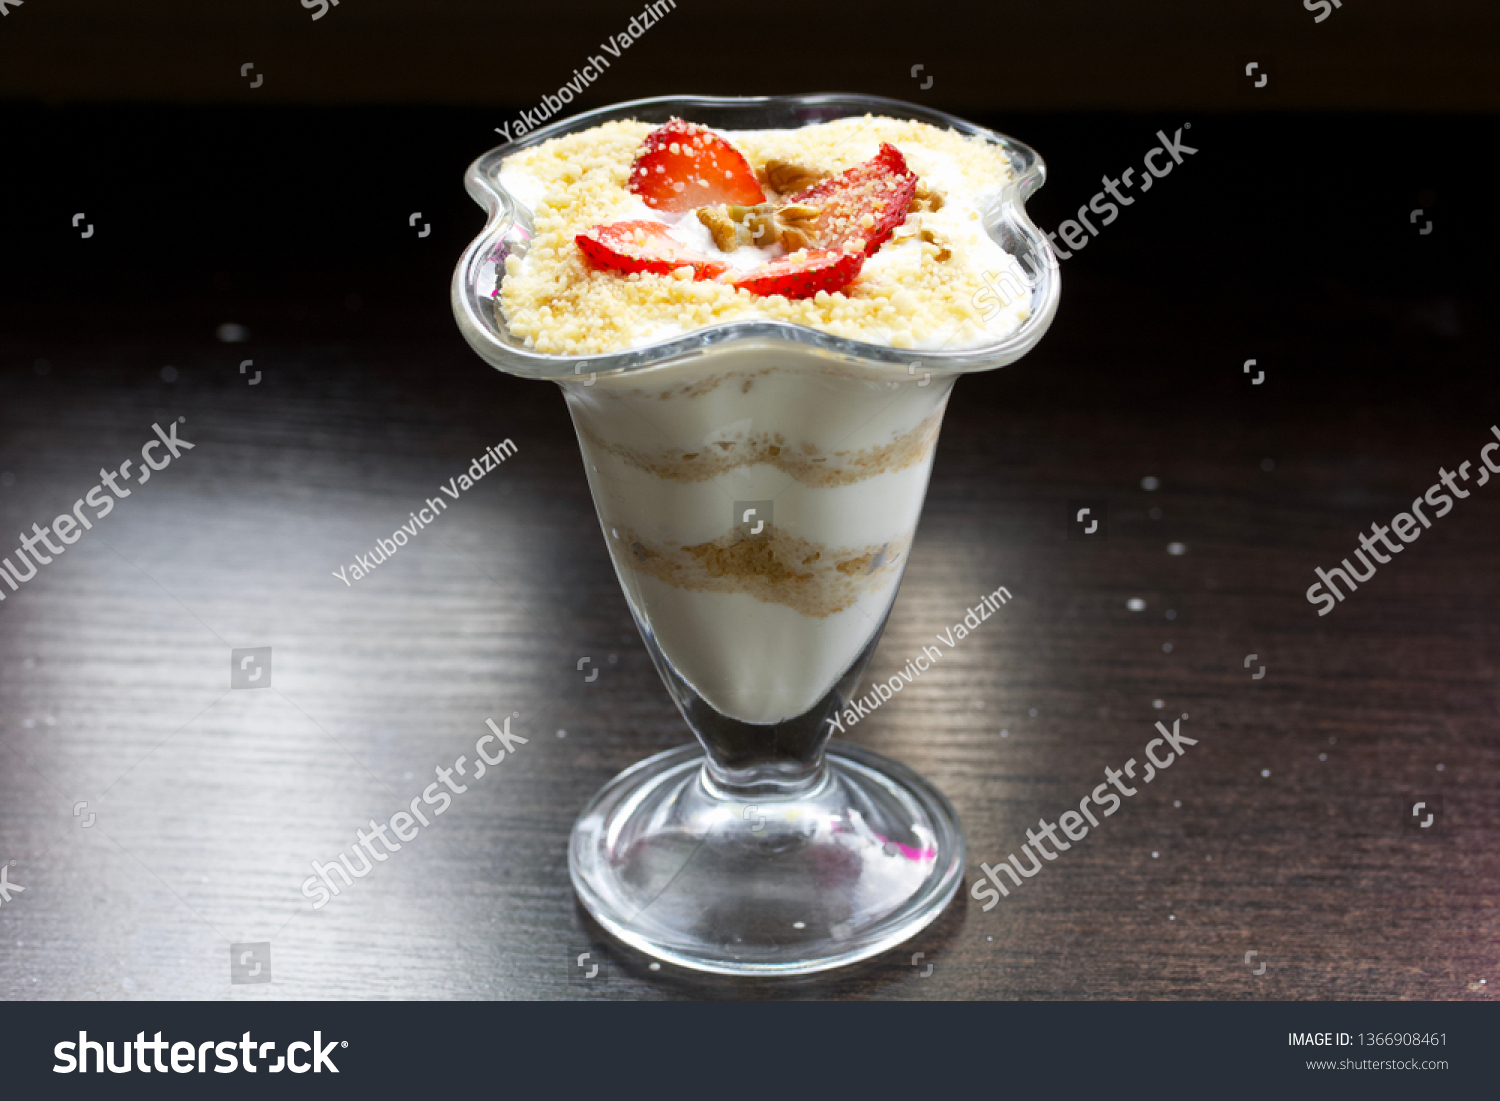 Dessert in a glass goblet. Layers laid biscuit crumbs and cream. Decorated with strawberry slices. With the addition of walnut. On a dark background. #1366908461